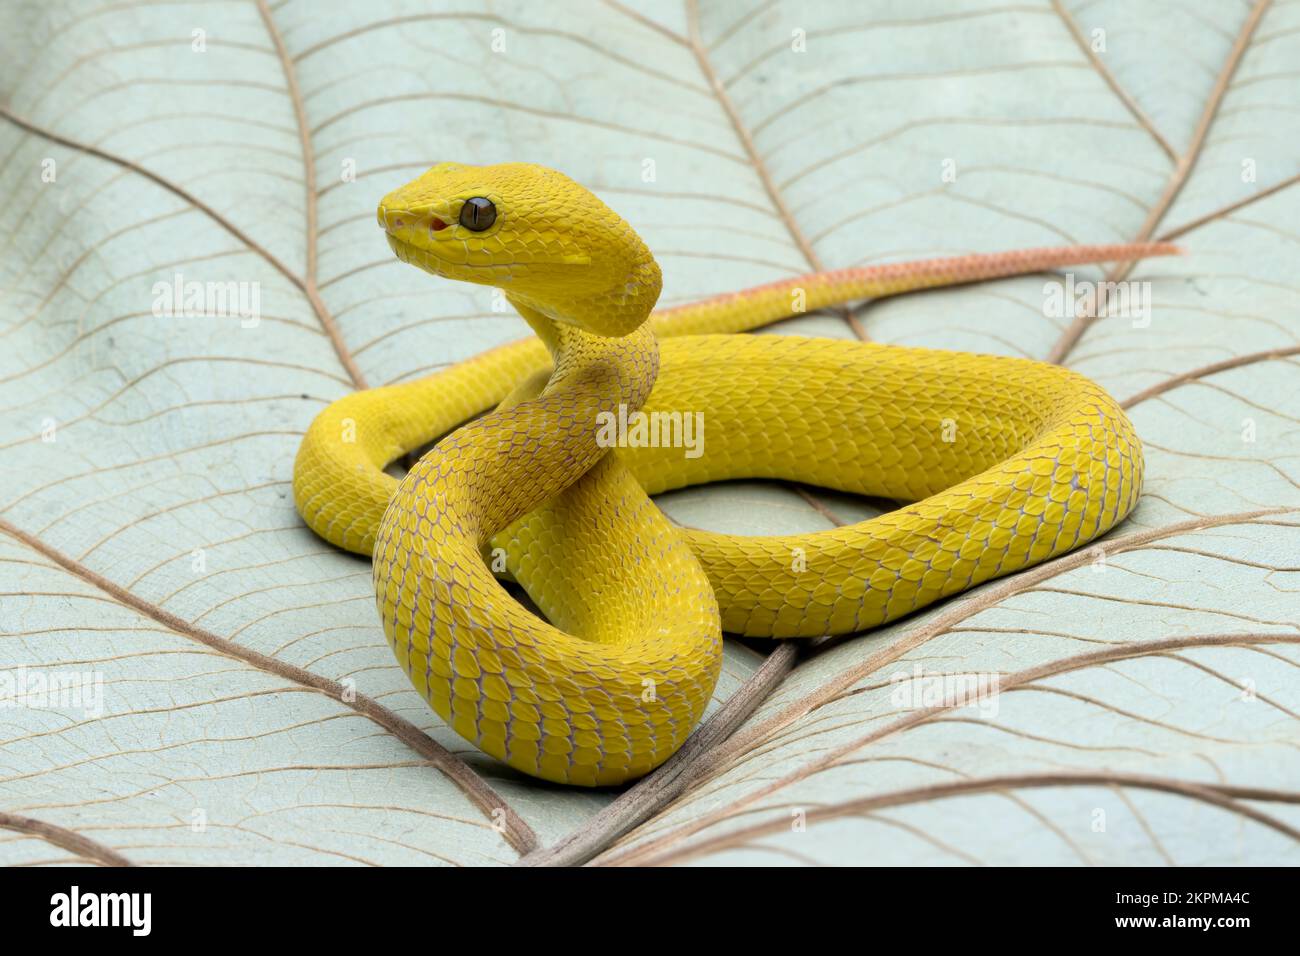 Close-up of a Yellow White-lipped Pit Viper on a leaf, Indonesia Stock Photo